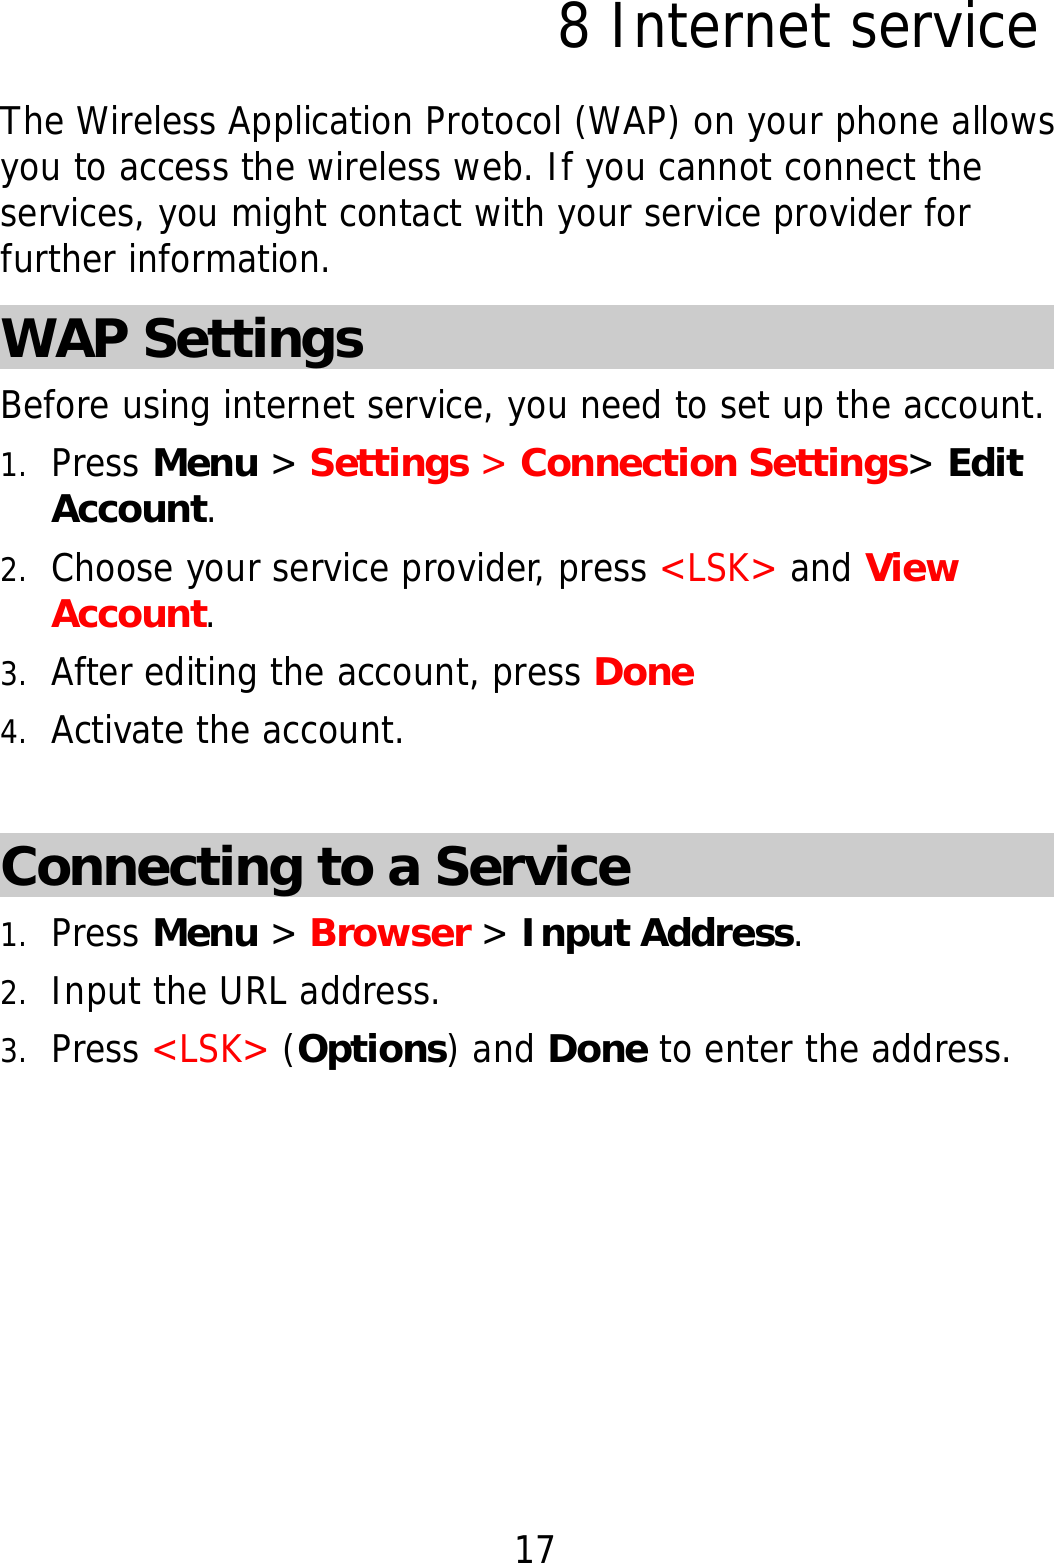 17 8 Internet service The Wireless Application Protocol (WAP) on your phone allows you to access the wireless web. If you cannot connect the services, you might contact with your service provider for further information. WAP Settings Before using internet service, you need to set up the account. 1. Press Menu &gt; Settings &gt; Connection Settings&gt; Edit Account. 2. Choose your service provider, press &lt;LSK&gt; and View Account. 3. After editing the account, press Done 4. Activate the account.     Connecting to a Service     1. Press Menu &gt; Browser &gt; Input Address. 2. Input the URL address. 3. Press &lt;LSK&gt; (Options) and Done to enter the address. 